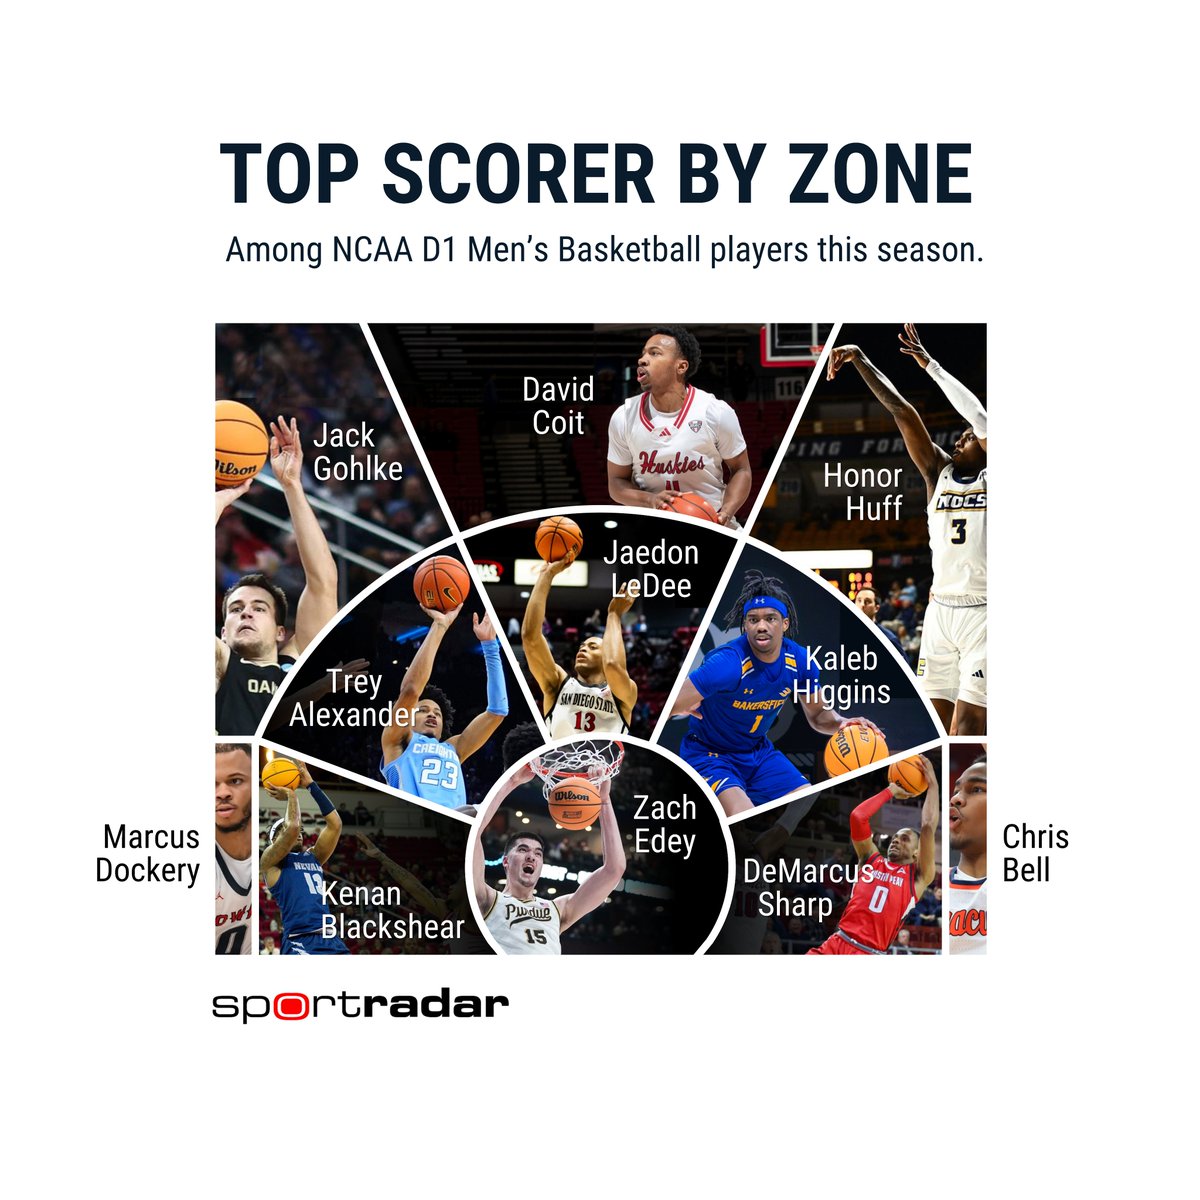 The top scorers by zone in college basketball this season: